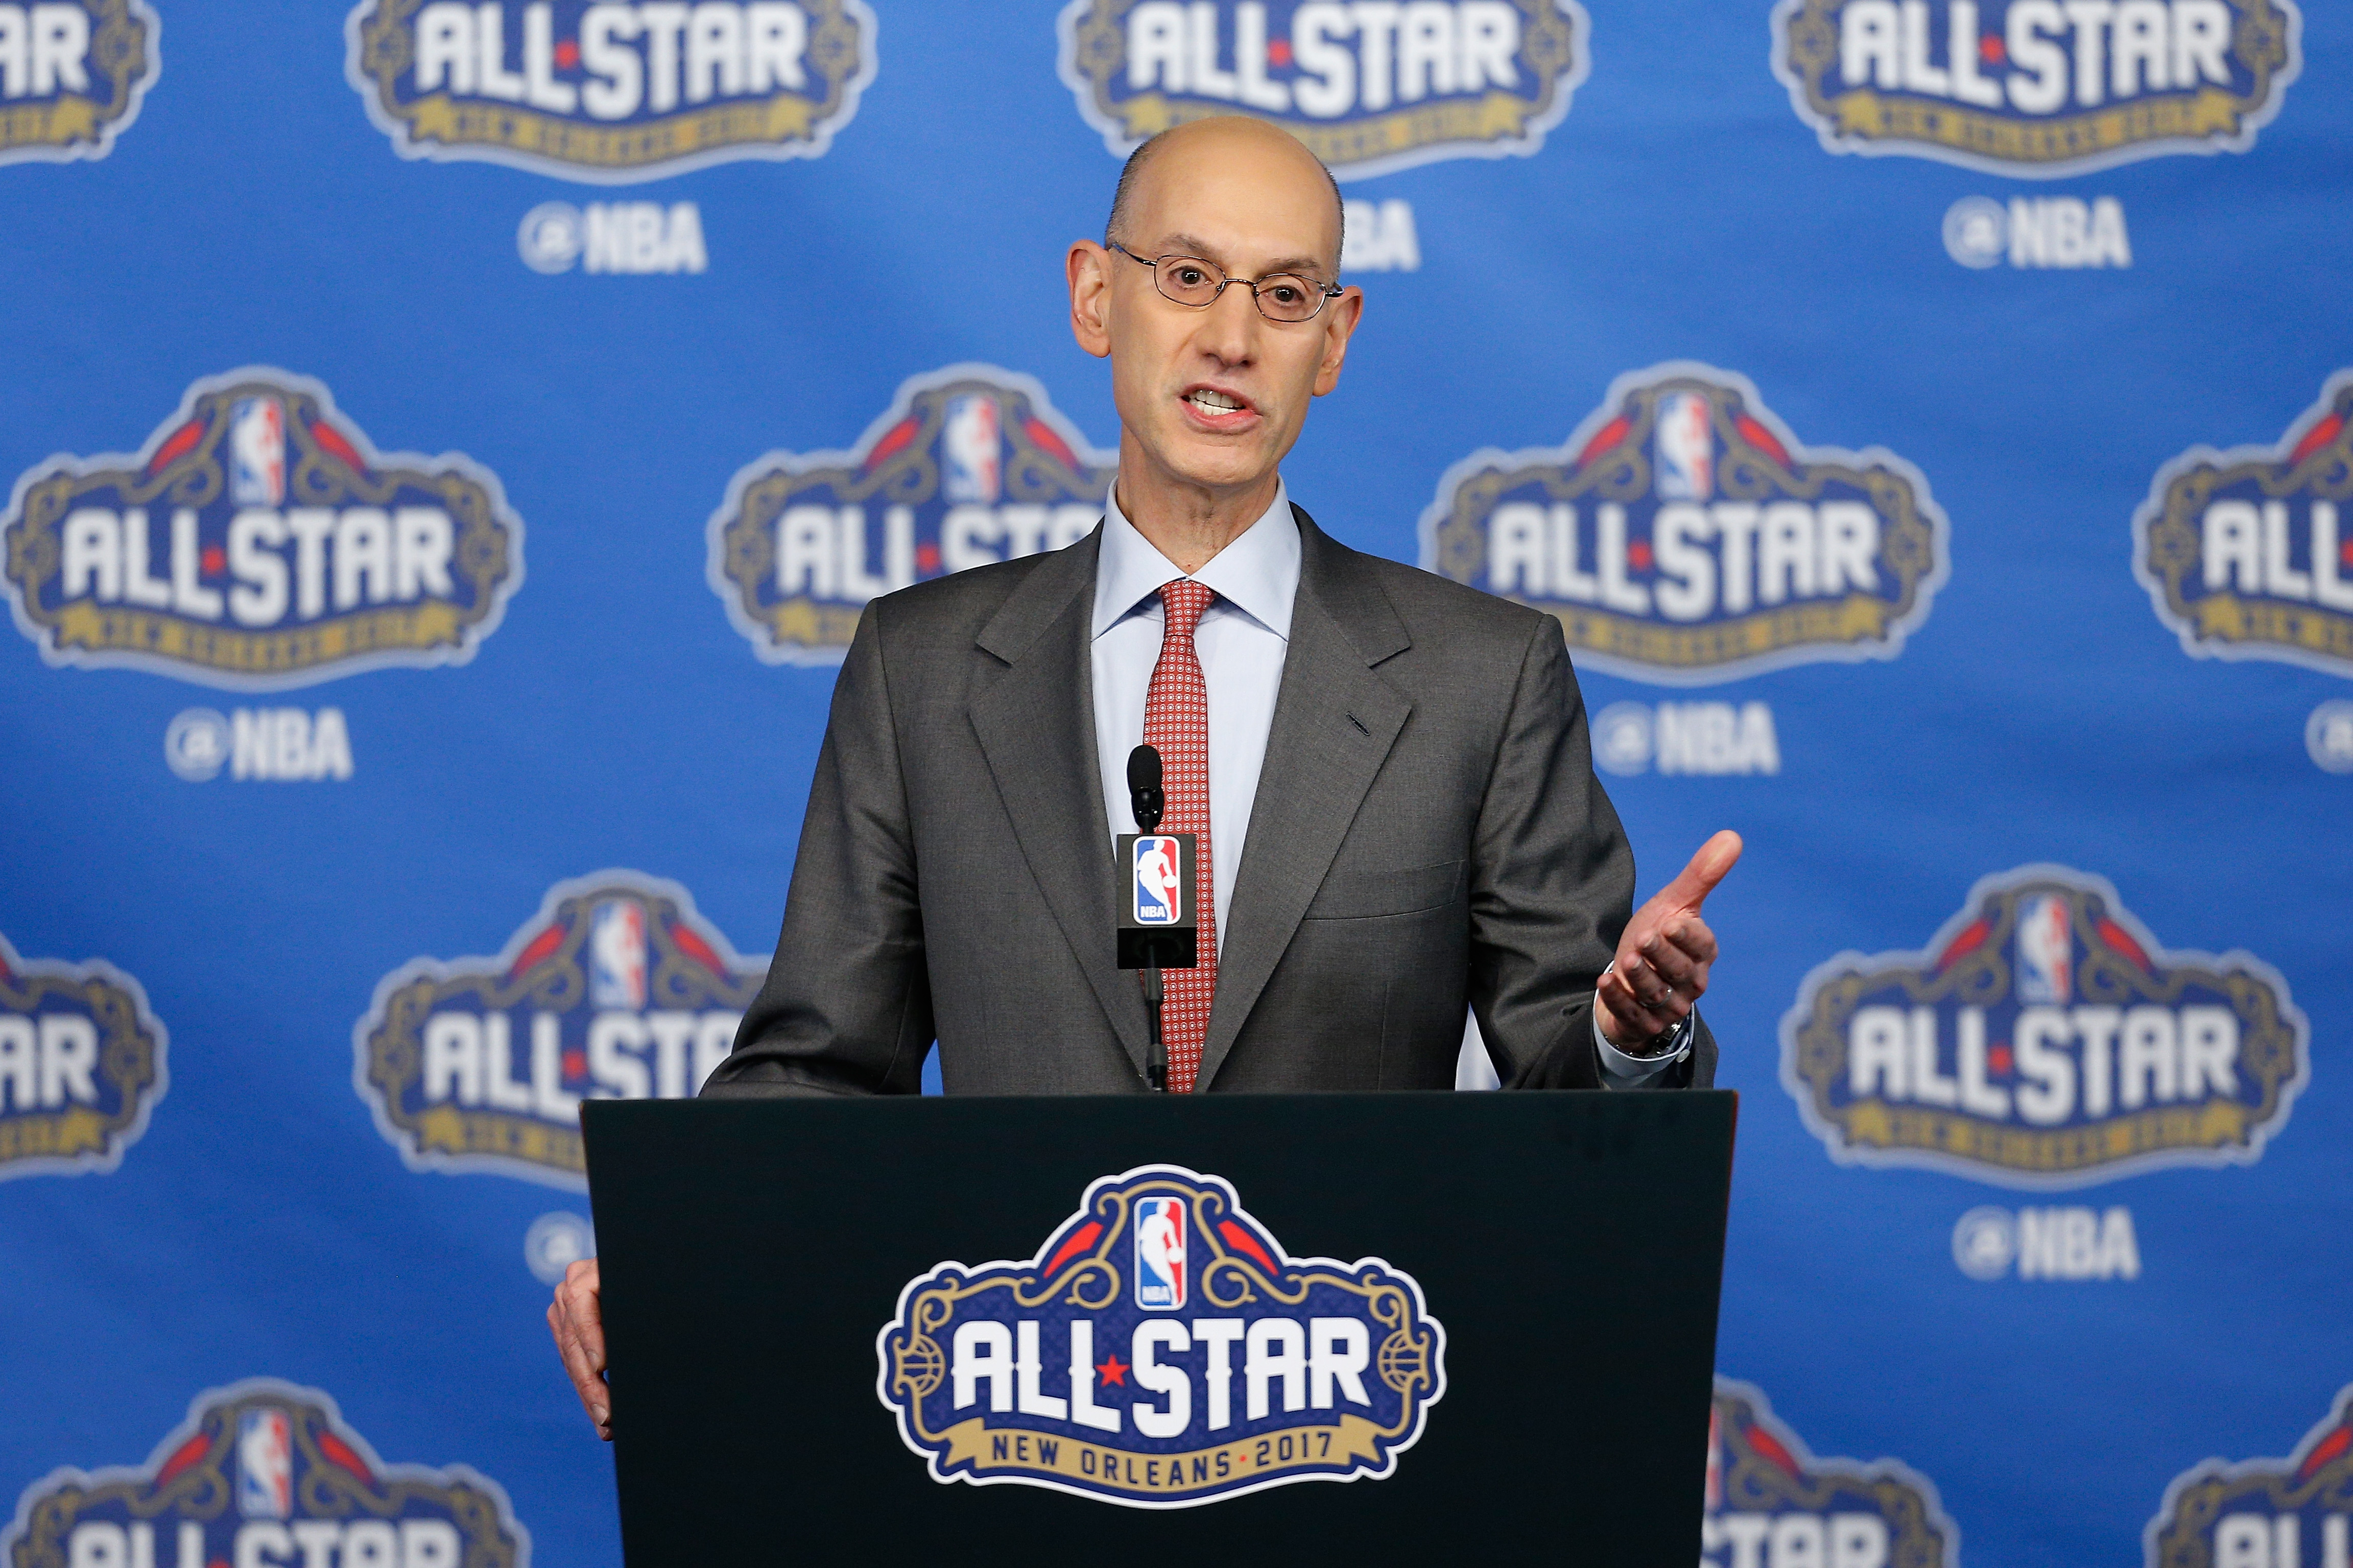 NEW ORLEANS, LA - FEBRUARY 18:  NBA Commissioner Adam Silver speaks with the media during a press conference at Smoothie King Center on February 18, 2017 in New Orleans, Louisiana. NOTE TO USER: User expressly acknowledges and agrees that, by downloading and/or using this photograph, user is consenting to the terms and conditions of the Getty Images License Agreement.  (Photo by Jonathan Bachman/Getty Images) (Jonathan Bachman&mdash;Getty Images)